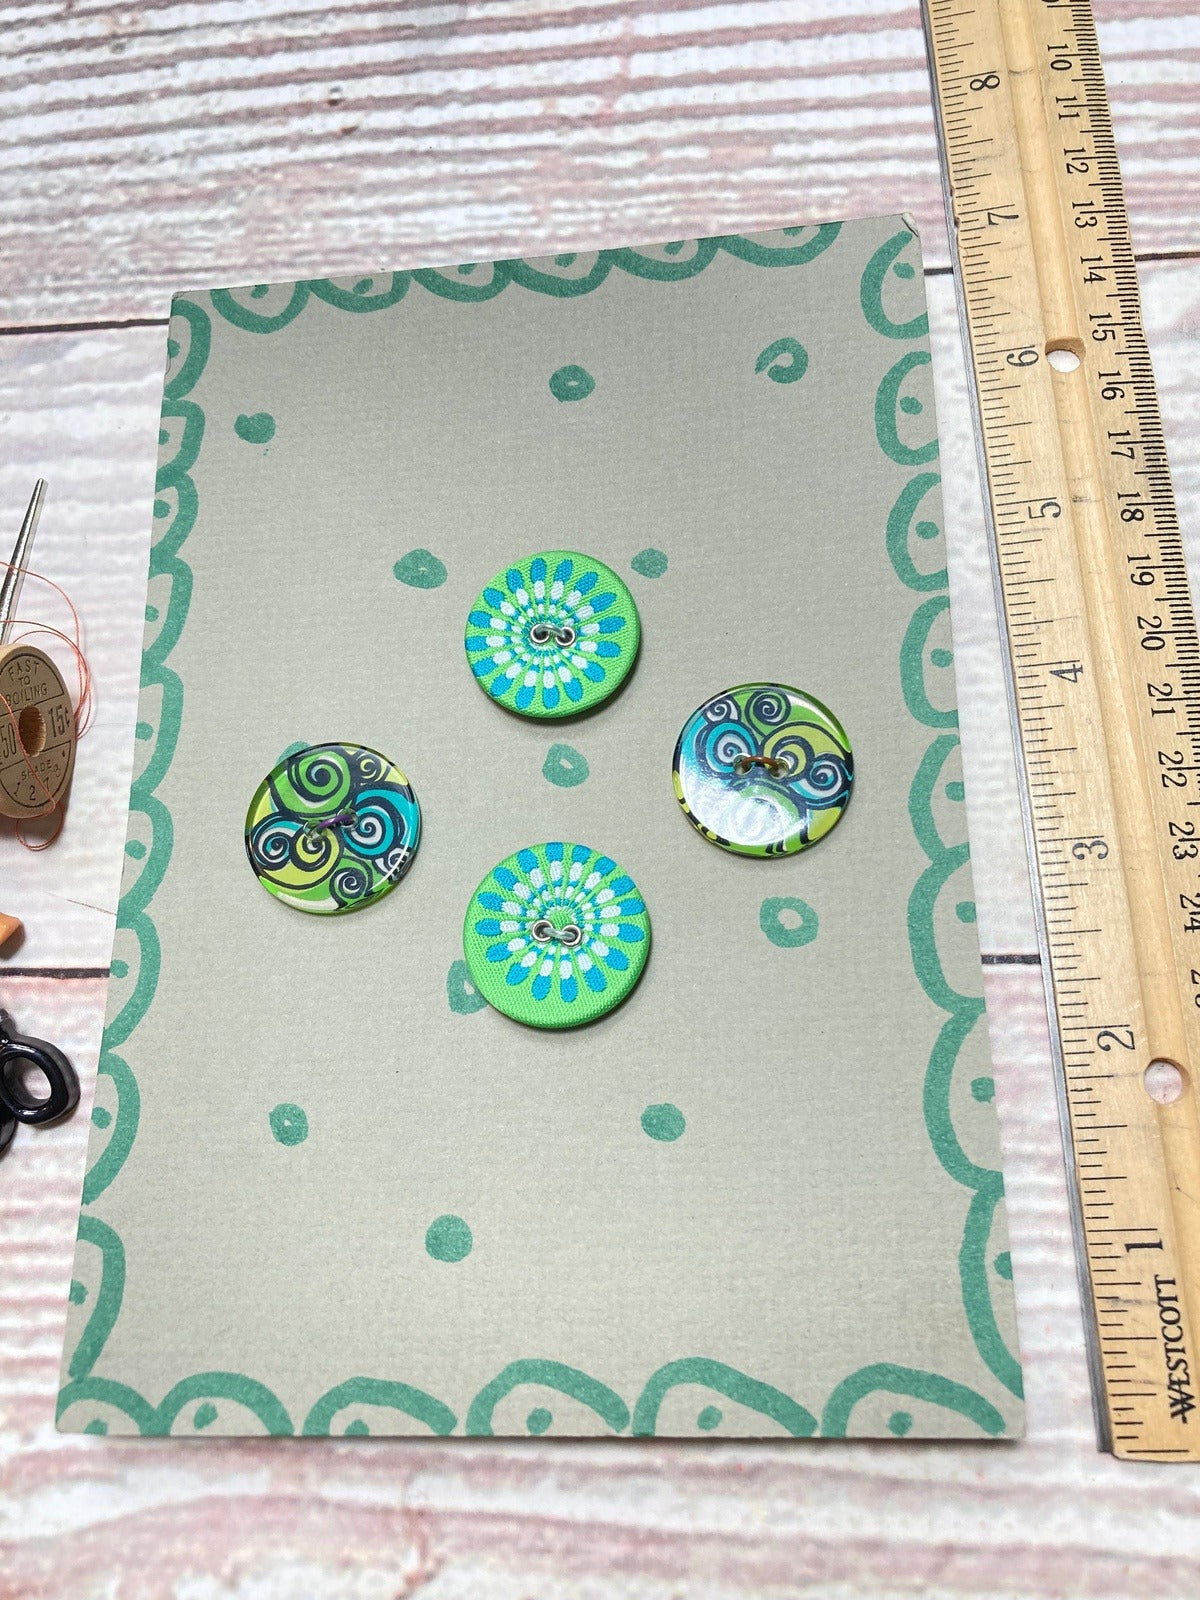 Vintage Button Collection, Mounted to Chipboard, Retro Green Color